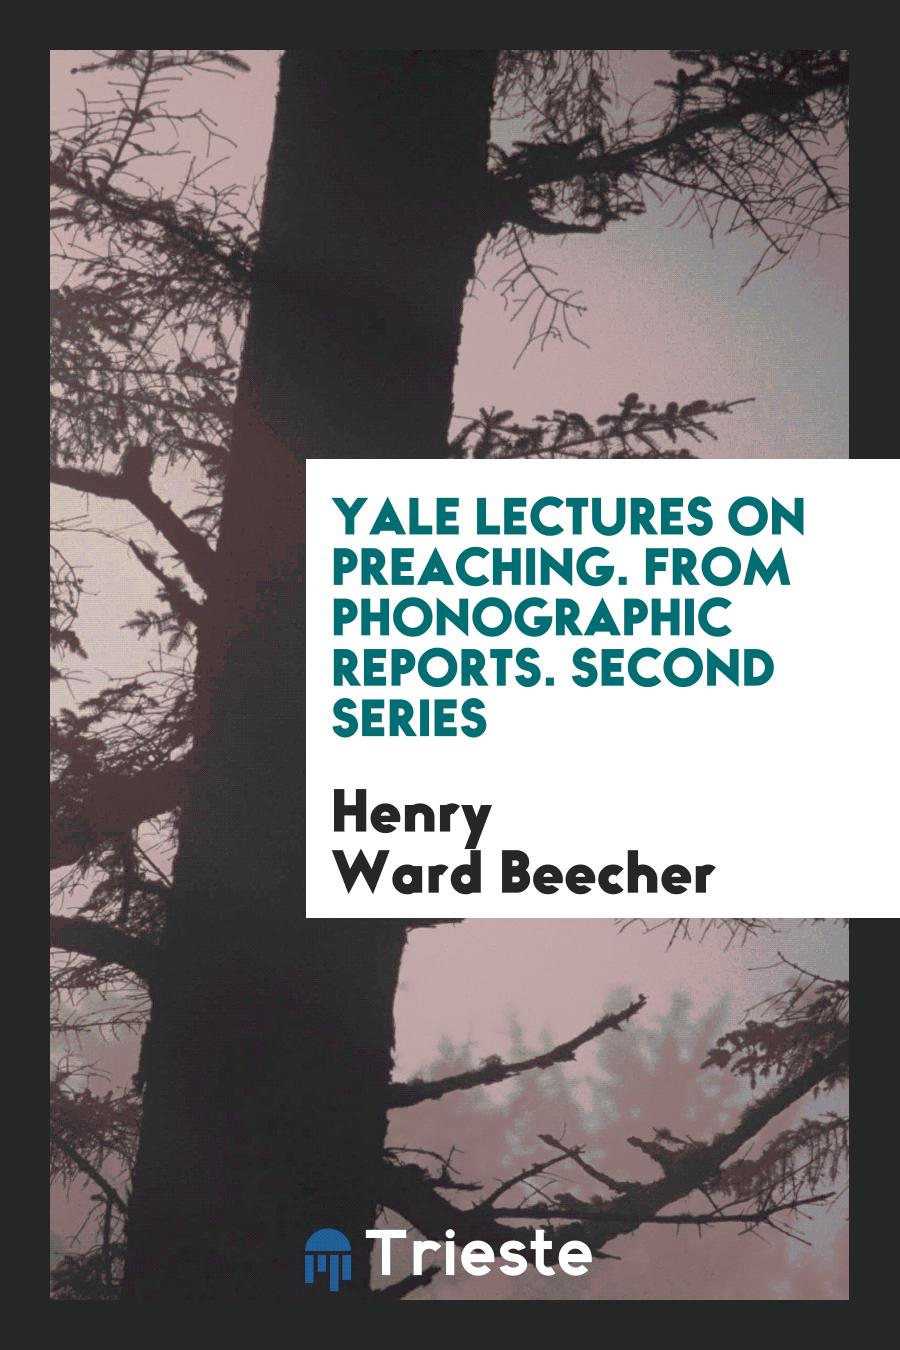 Henry Ward Beecher - Yale Lectures on Preaching. From Phonographic Reports. Second Series